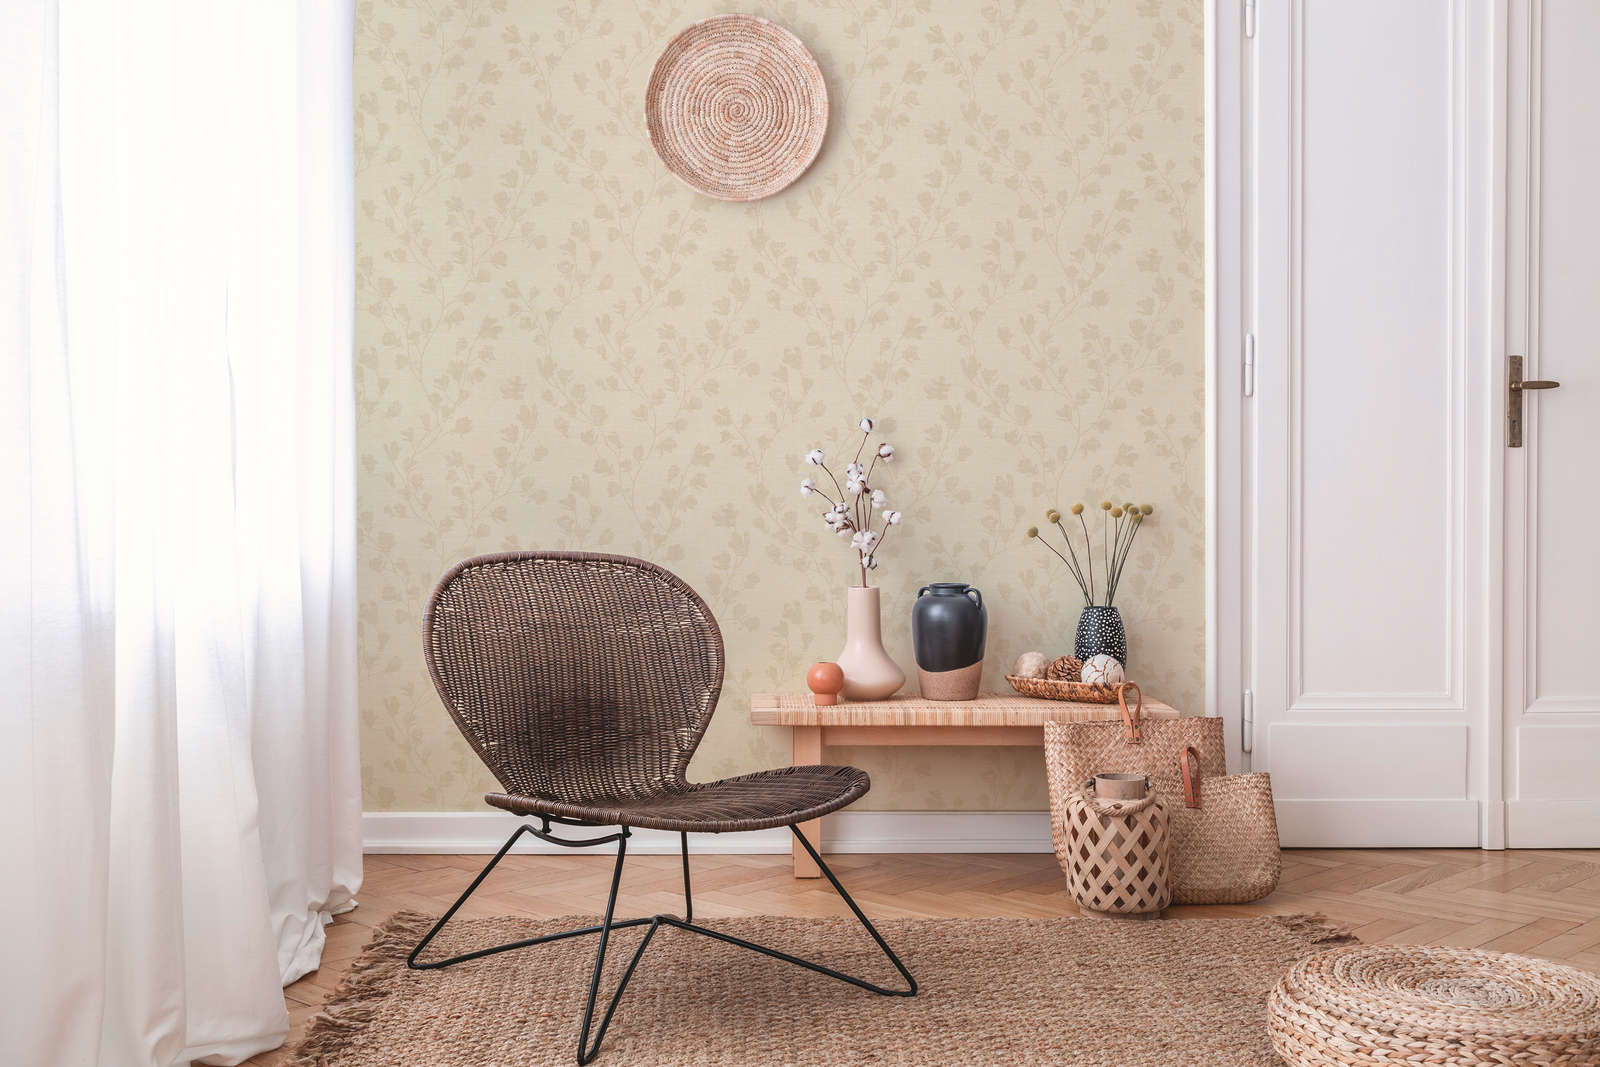             Pattern wallpaper with leaves in country style - cream, beige
        